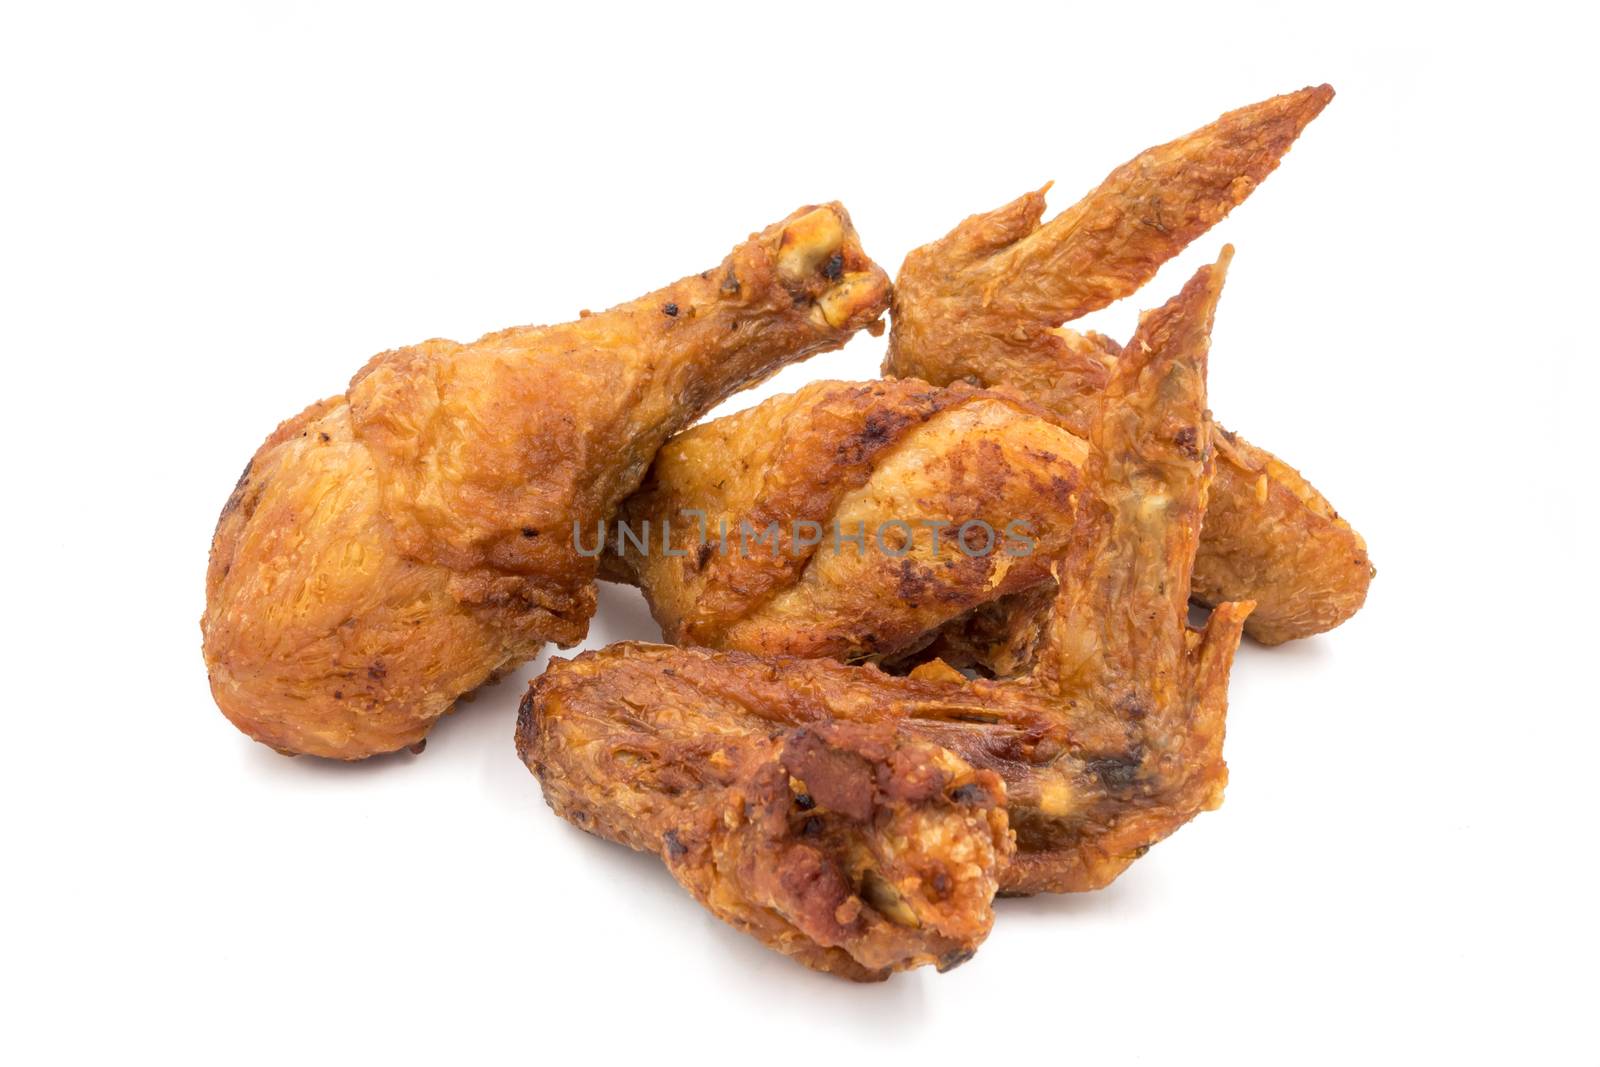 Fried chicken legs and wings on a white background. by ronnarong